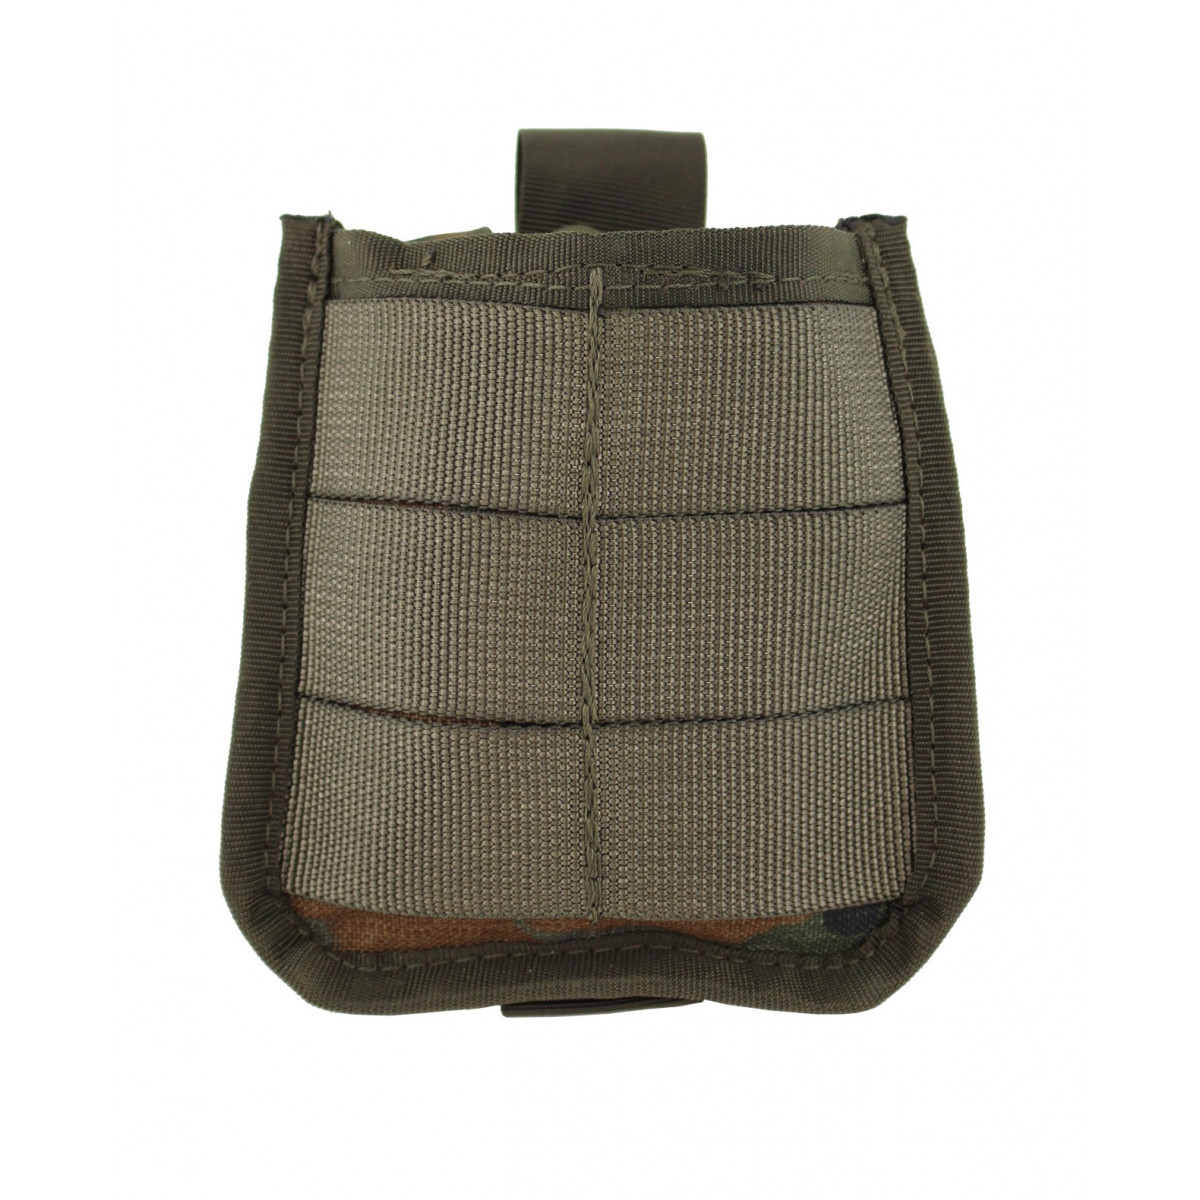 Drop bag light version 5 liters for ammunition and magazines MOLLE compatible